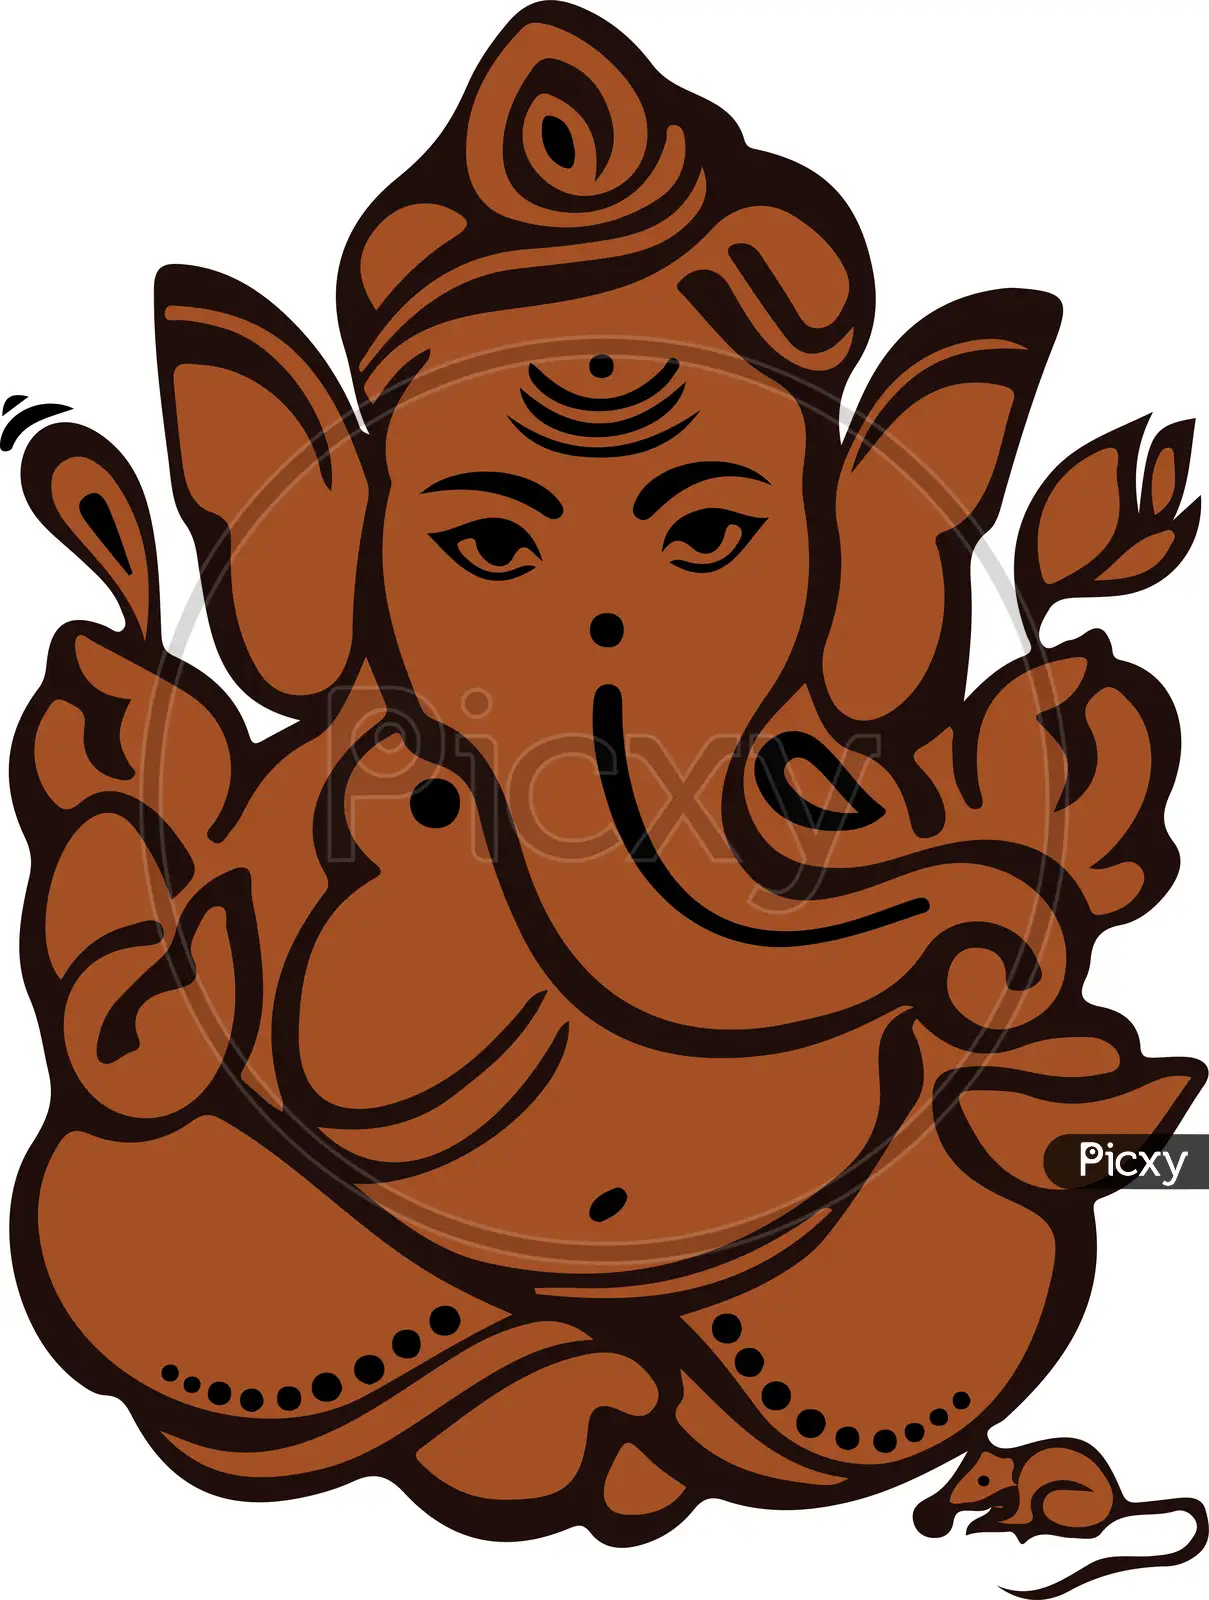 Lord Ganesha Coloring Pages - Free Printable Coloring Pages for Kids